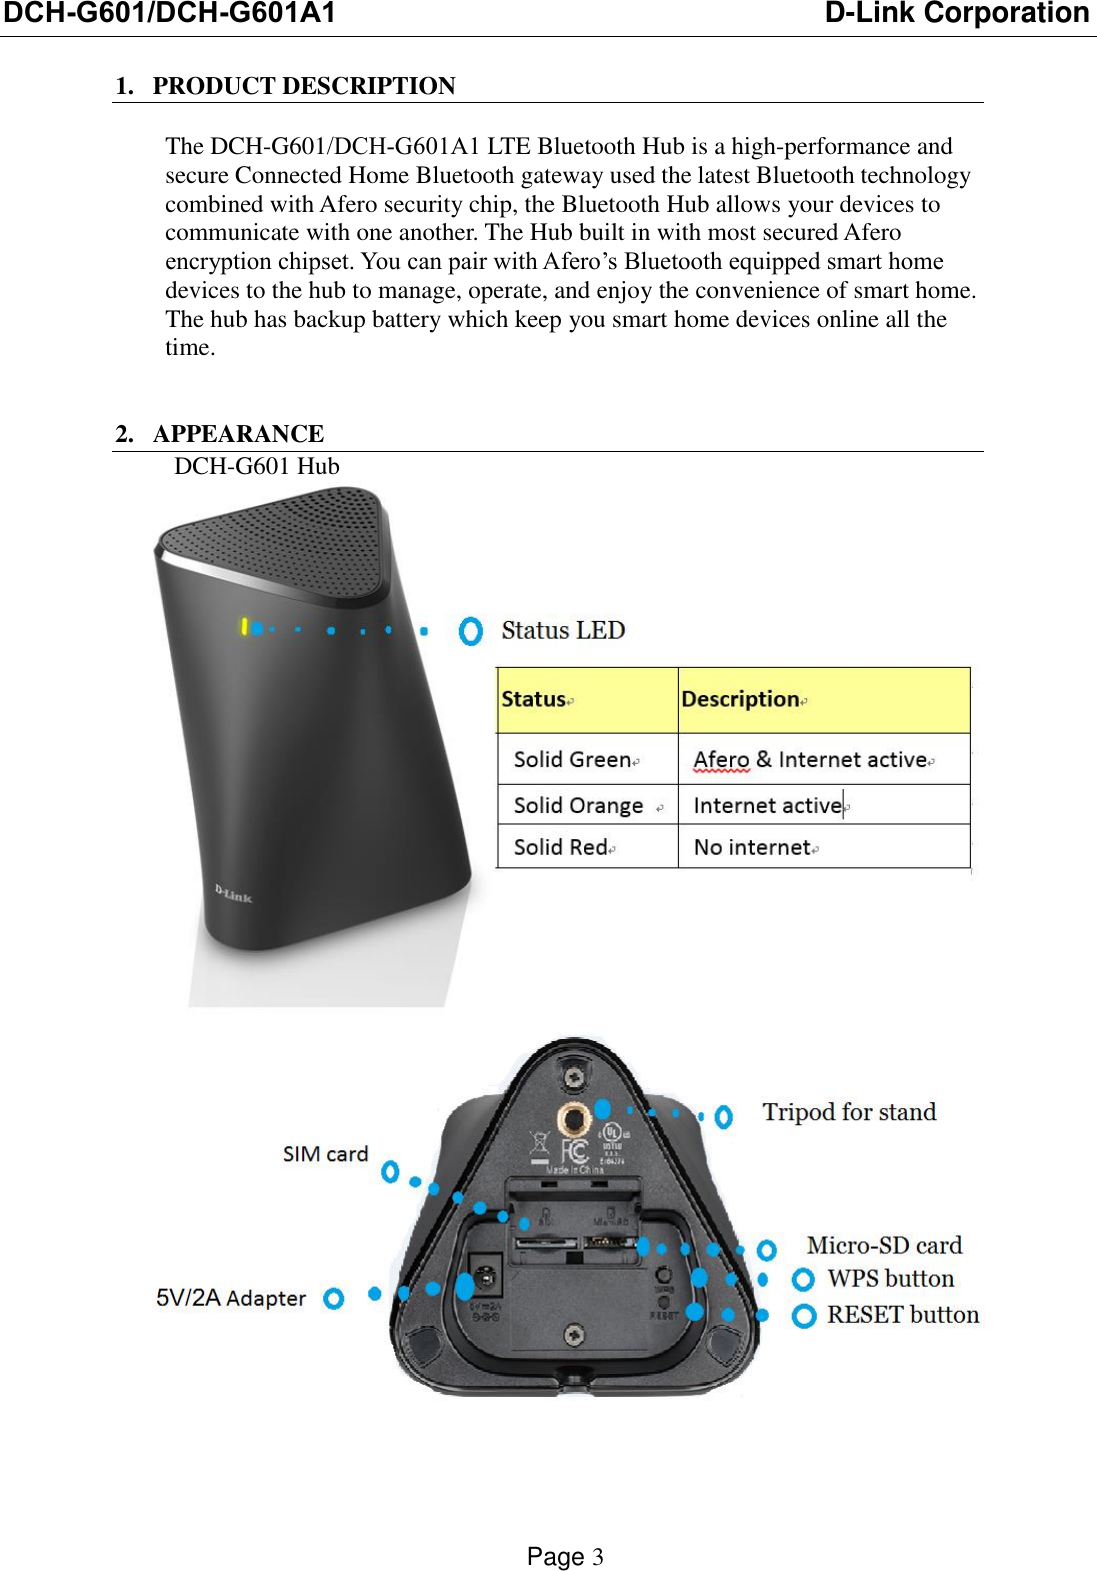 DCH-G601/DCH-G601A1 D-Link CorporationPage 3 1. PRODUCT DESCRIPTIONThe DCH-G601/DCH-G601A1 LTE Bluetooth Hub is a high-performance and secure Connected Home Bluetooth gateway used the latest Bluetooth technology combined with Afero security chip, the Bluetooth Hub allows your devices to communicate with one another. The Hub built in with most secured Afero encryption chipset. You can pair with Afero’s Bluetooth equipped smart home devices to the hub to manage, operate, and enjoy the convenience of smart home. The hub has backup battery which keep you smart home devices online all the time. 2. APPEARANCEDCH-G601 Hub 